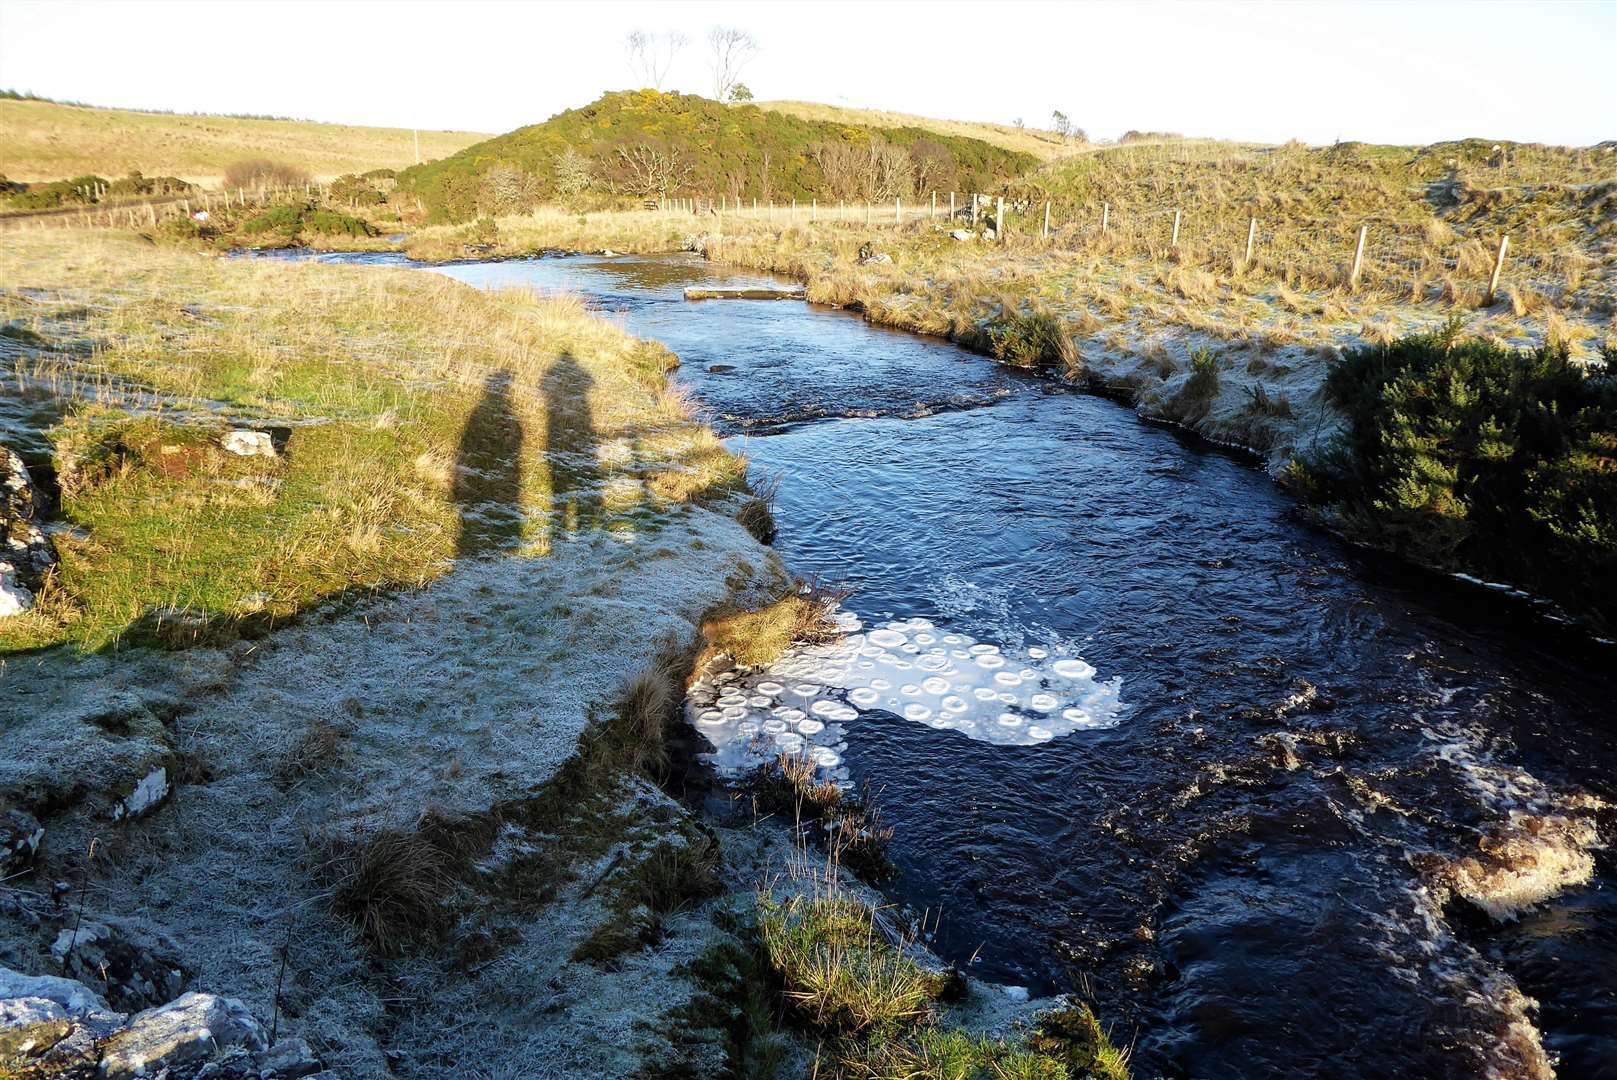 Ice pancakes at Scouthal Burn. Cuckoo Hill is in the background and the remains of an ancient monastery and cemetery known as the Clow Chapel is on the right hand side.